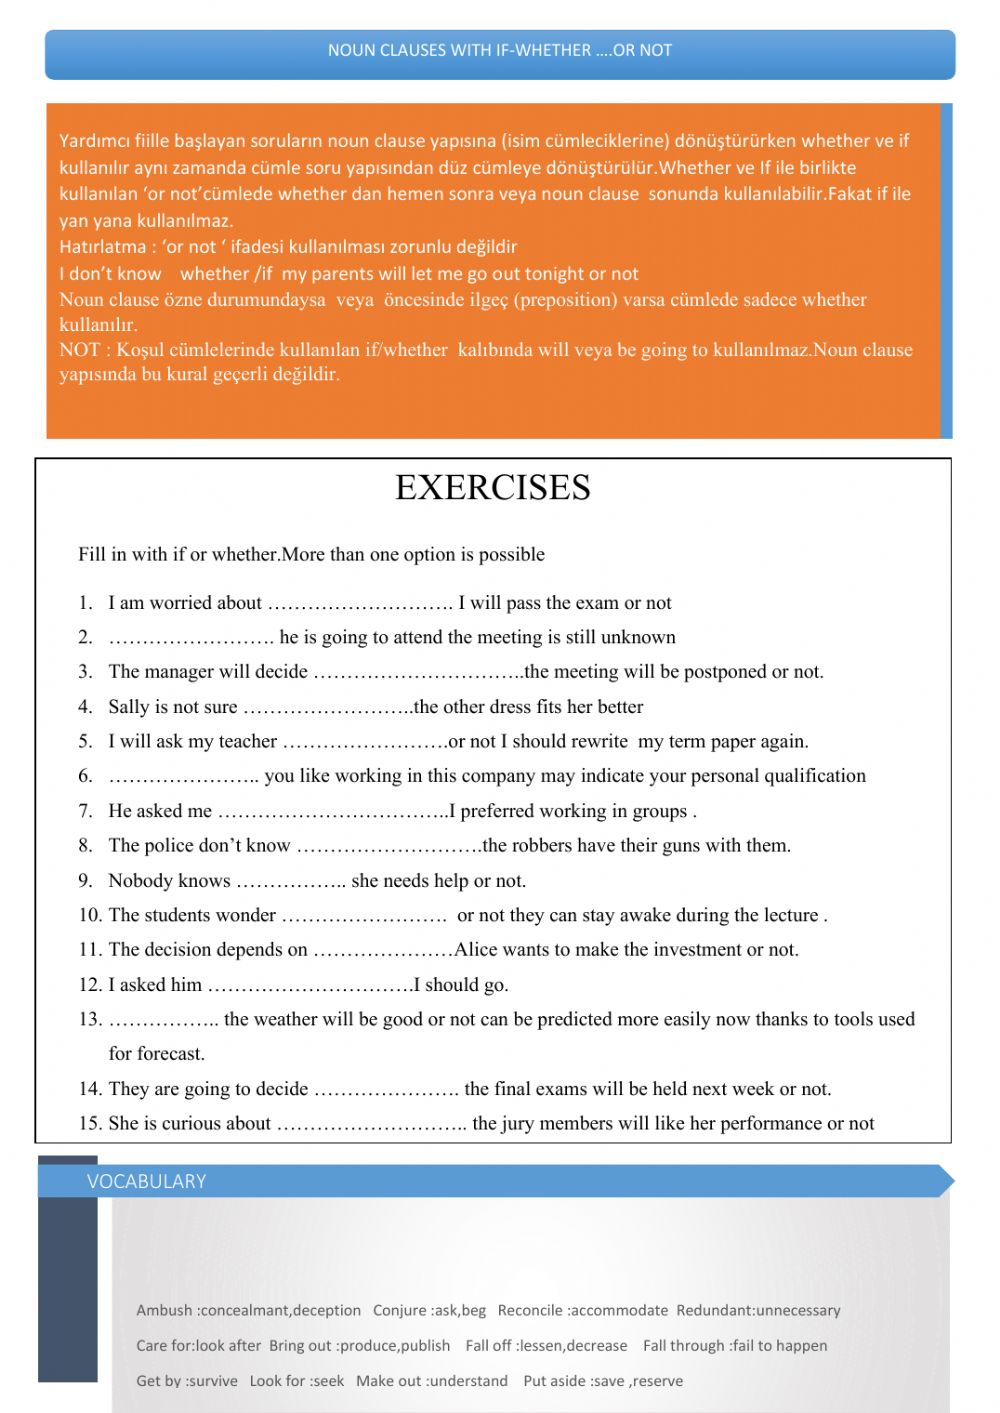 noun-adjective-adverb-clause-worksheet-with-answers-adverbworksheets